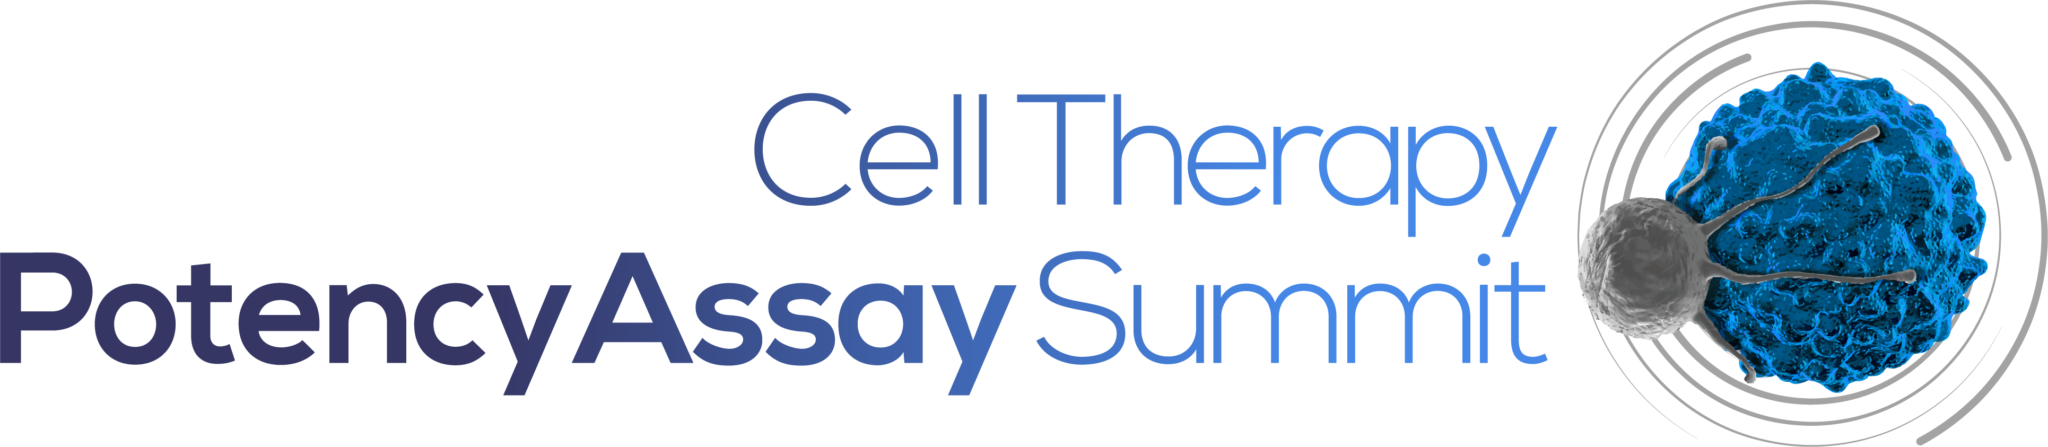 Join Avance Biosciences at the 2nd Annual Cell Therapy Potency Assay Summit for cutting-edge cell therapy insights –  May 31-June 2, 2023